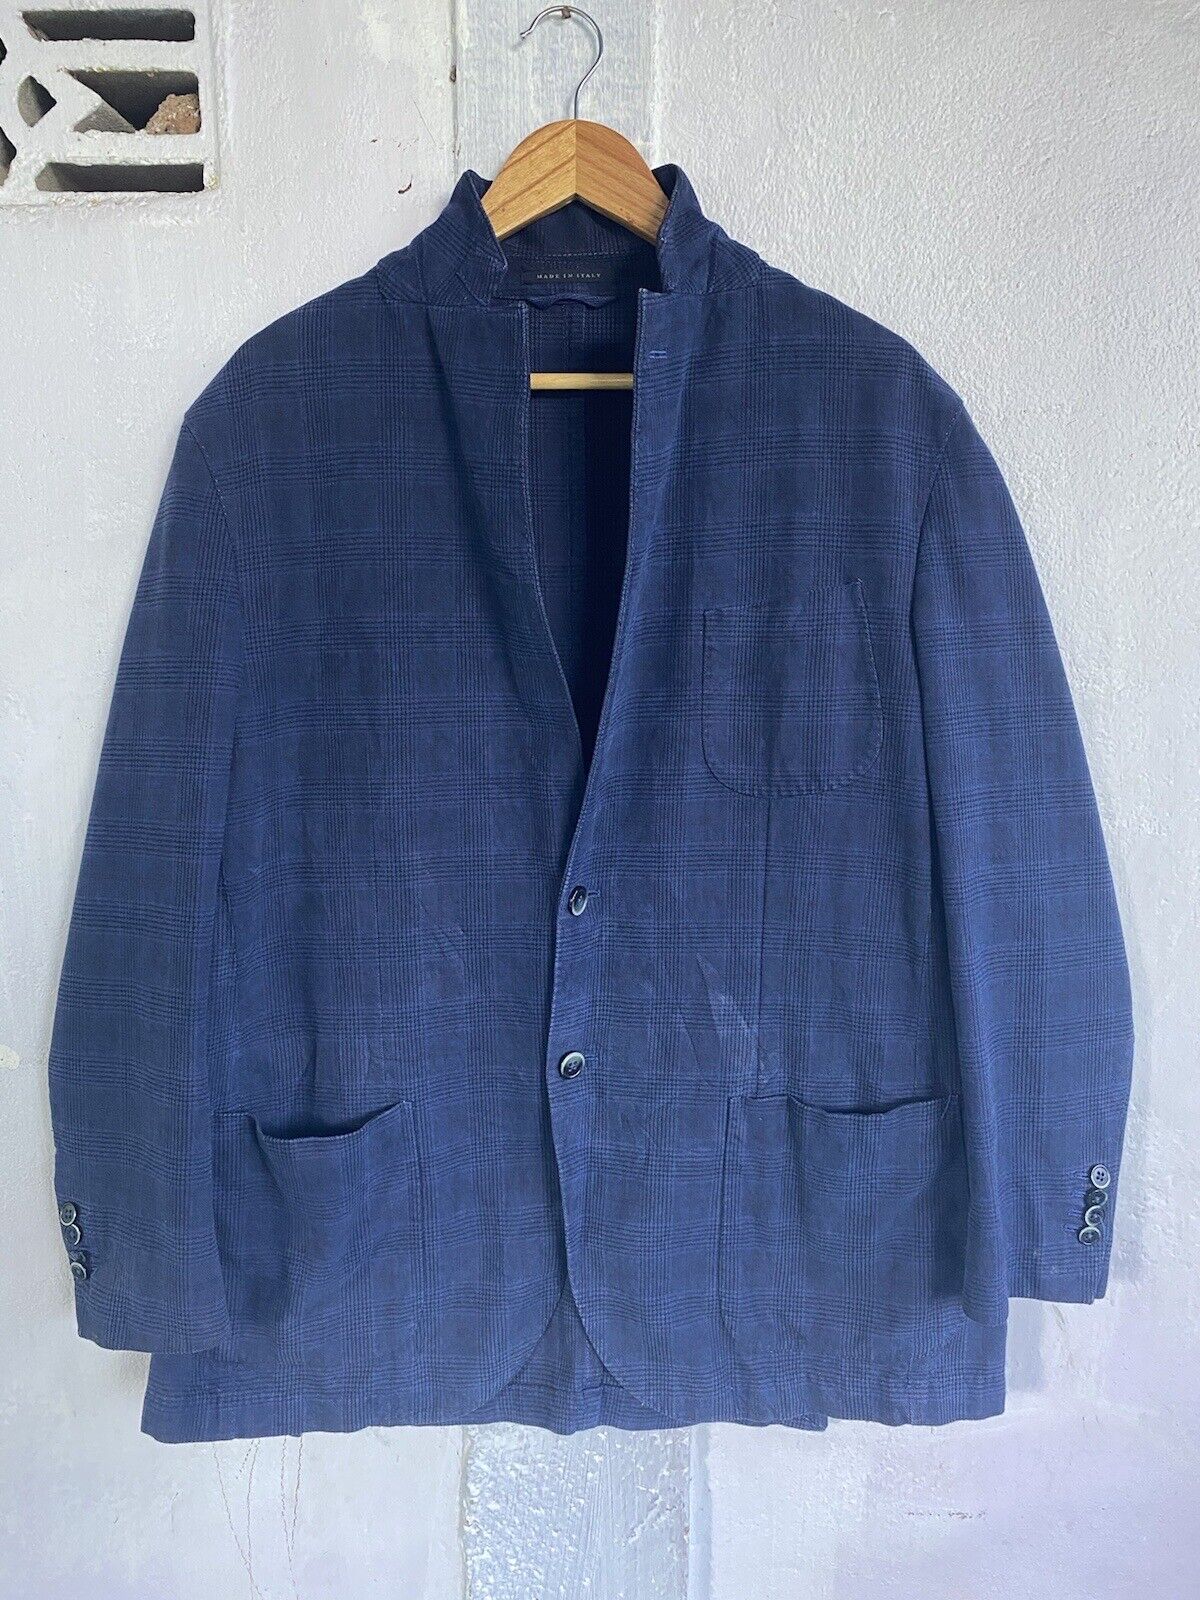 Vintage L.B.M 1991 Limited Edition Coat Men’s Blazer Jacket Made In Italy